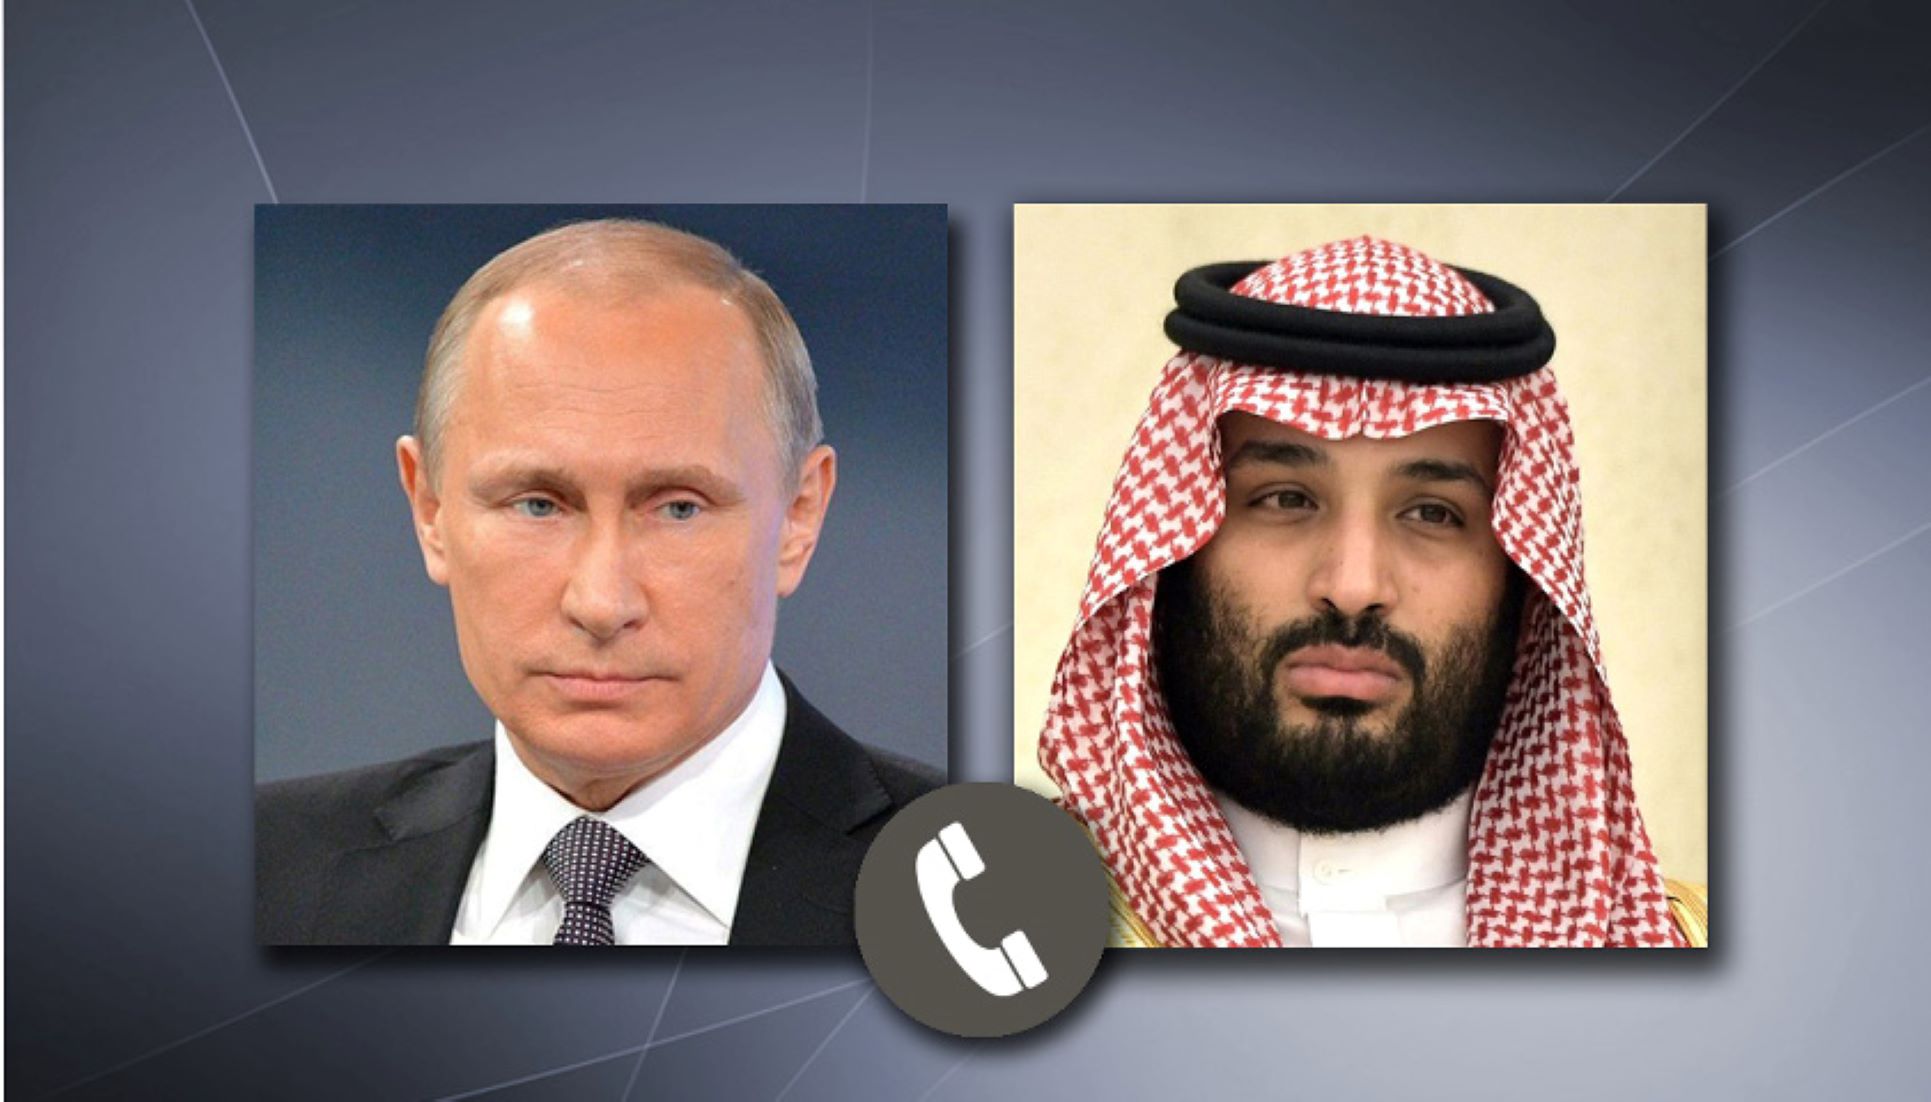 Putin, Saudi Crown Prince Discussed Stability Of Energy Markets